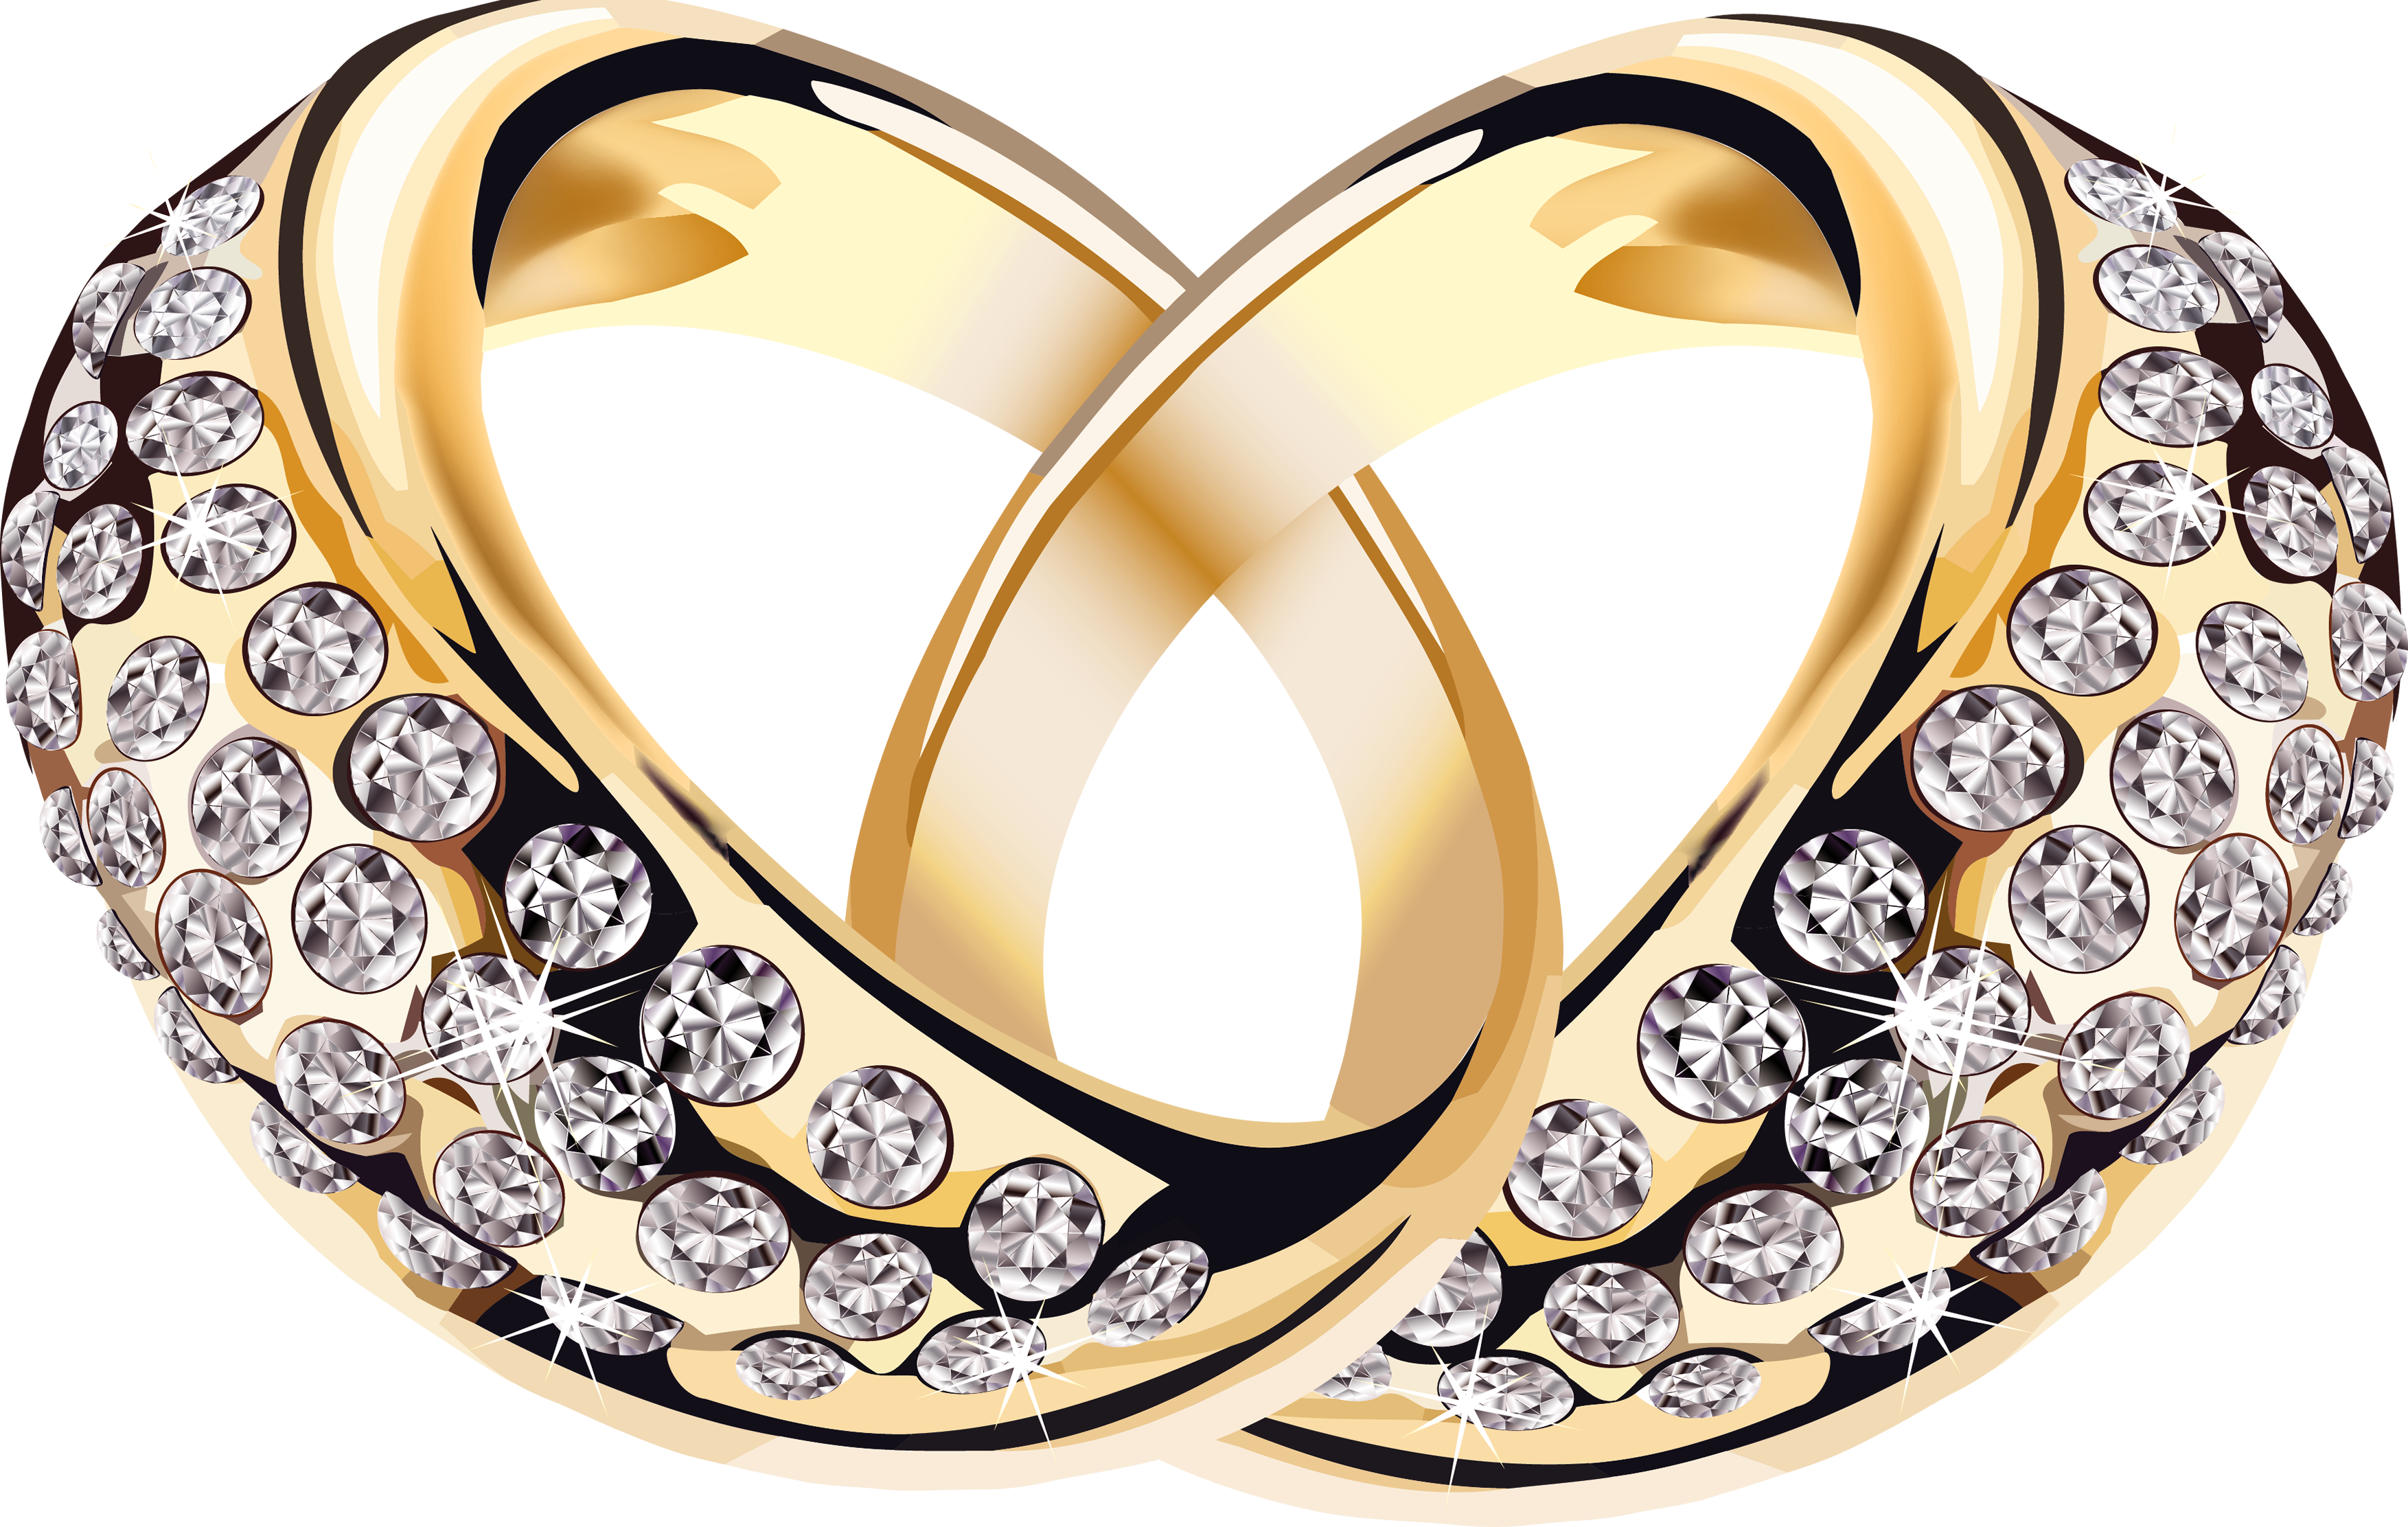 Jewelry Png Image - Jewellary, Transparent background PNG HD thumbnail